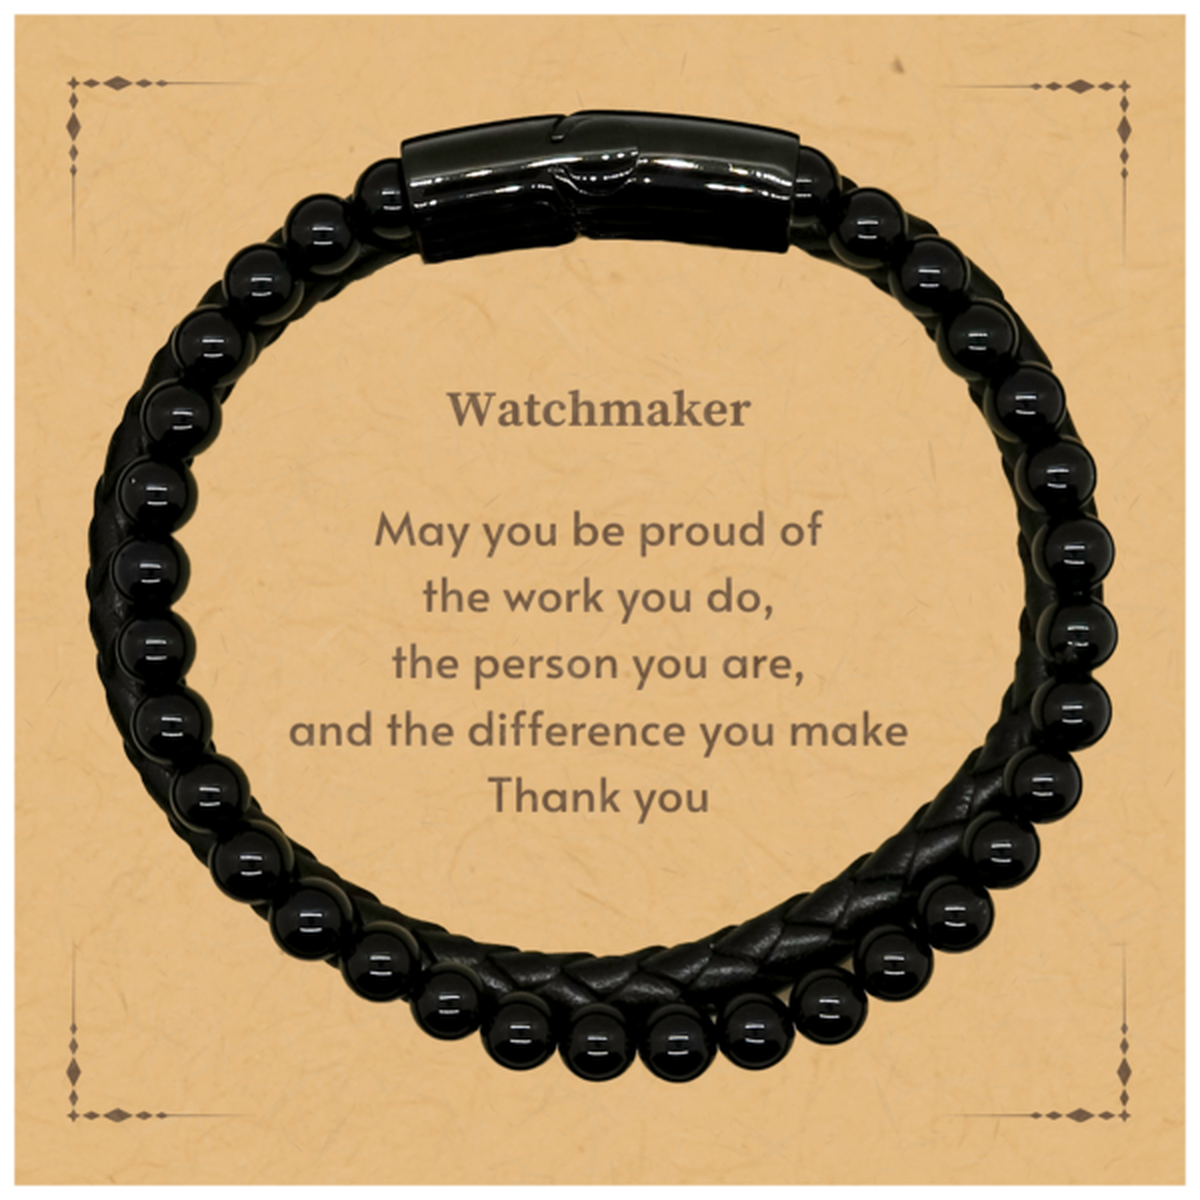 Heartwarming Stone Leather Bracelets Retirement Coworkers Gifts for Watchmaker, Watchmaker May You be proud of the work you do, the person you are Gifts for Boss Men Women Friends